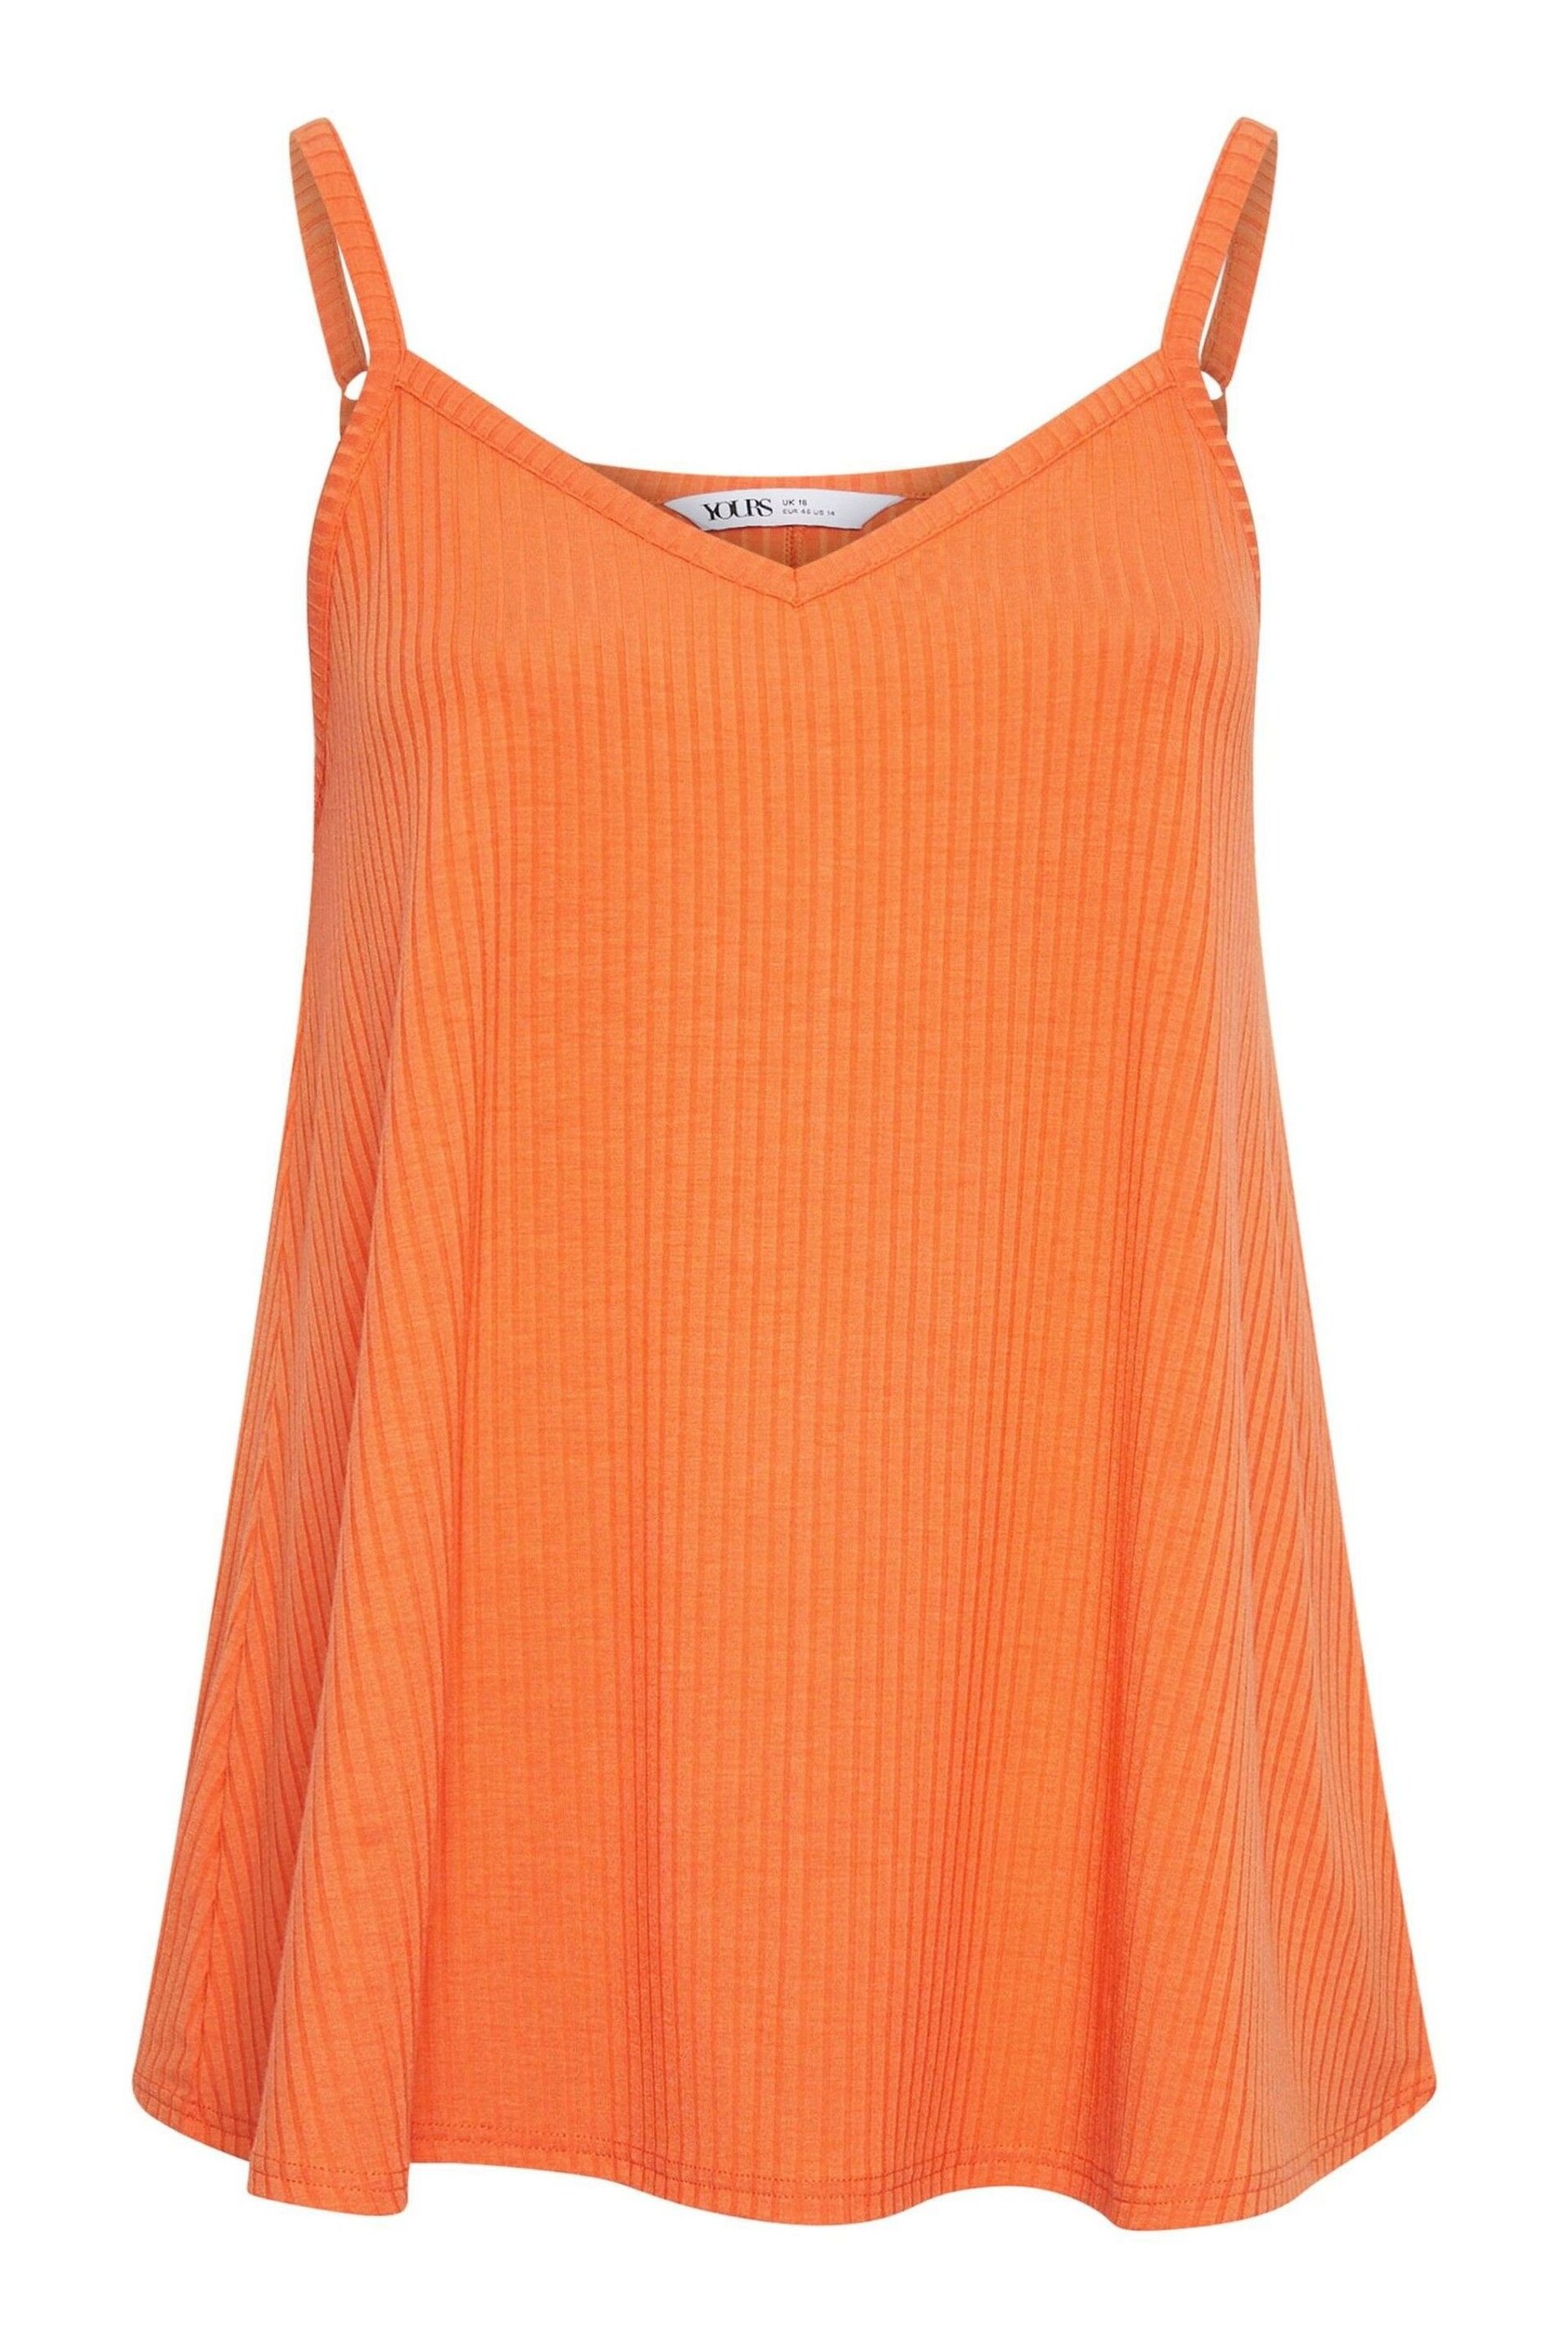 Yours Curve Orange Ribbed Cami - Image 5 of 5